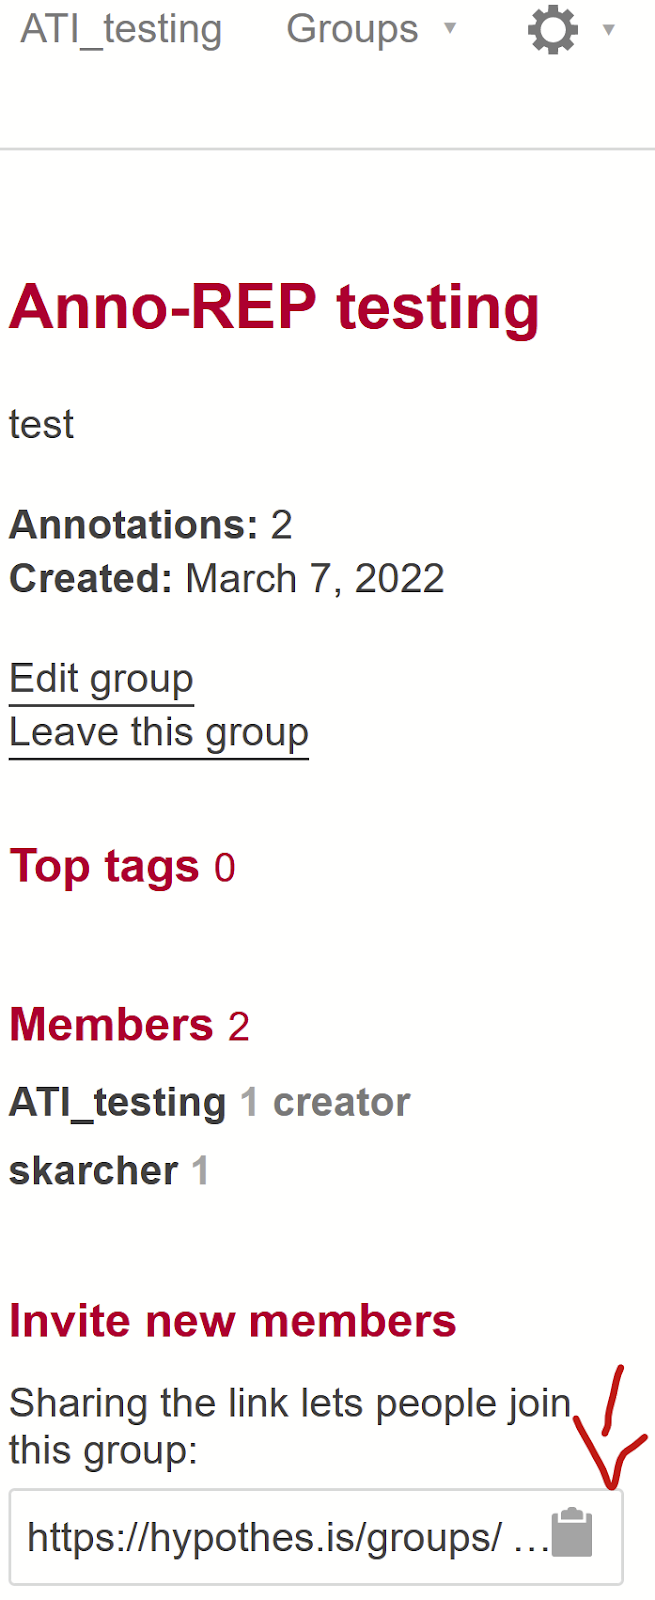 The full group menu within Hypothes.is, with a red arrow pointing towards the group URL link copy button